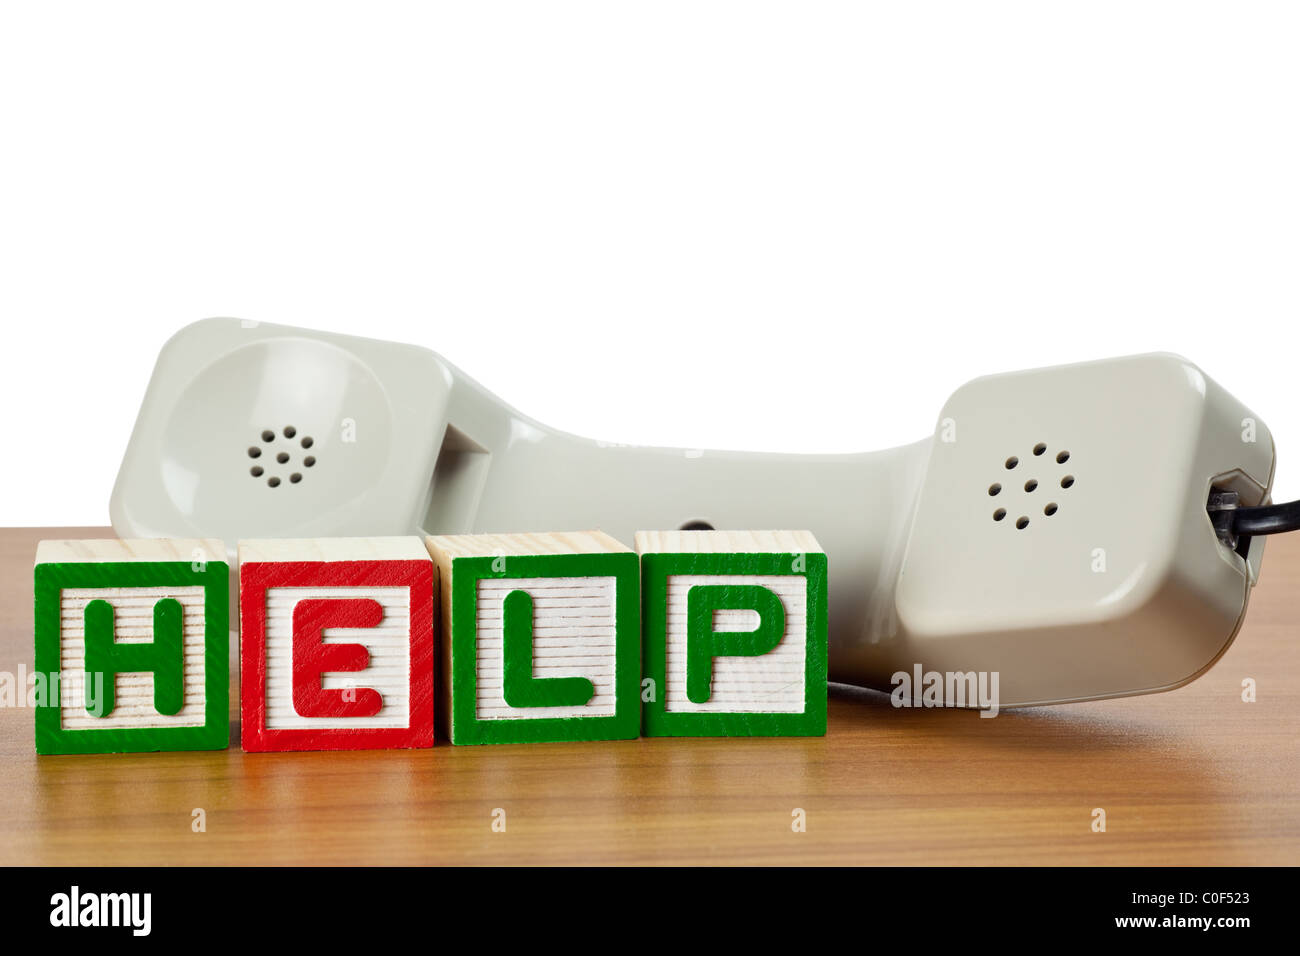 Attempt to call a nil value. Call for help. Phone help 3d. B&R help for Phone. Help your Phone.